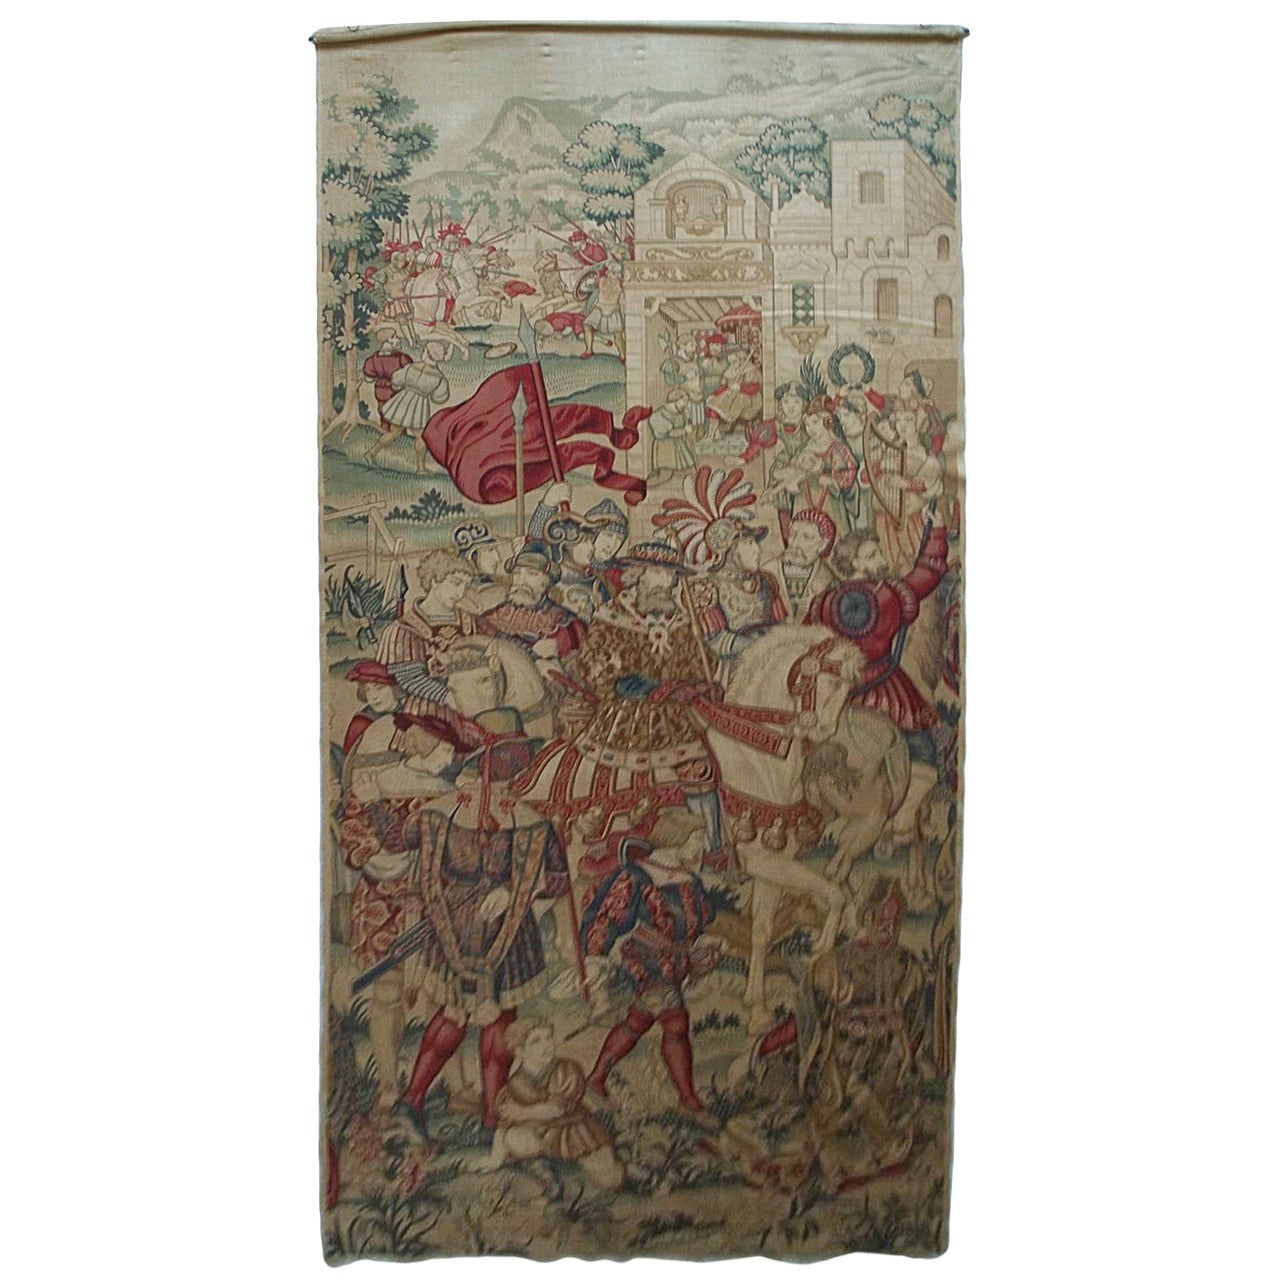 Superb, Large, Wall Hanging, Tapestry, Rich Medieval Pattern, French, circa 1900